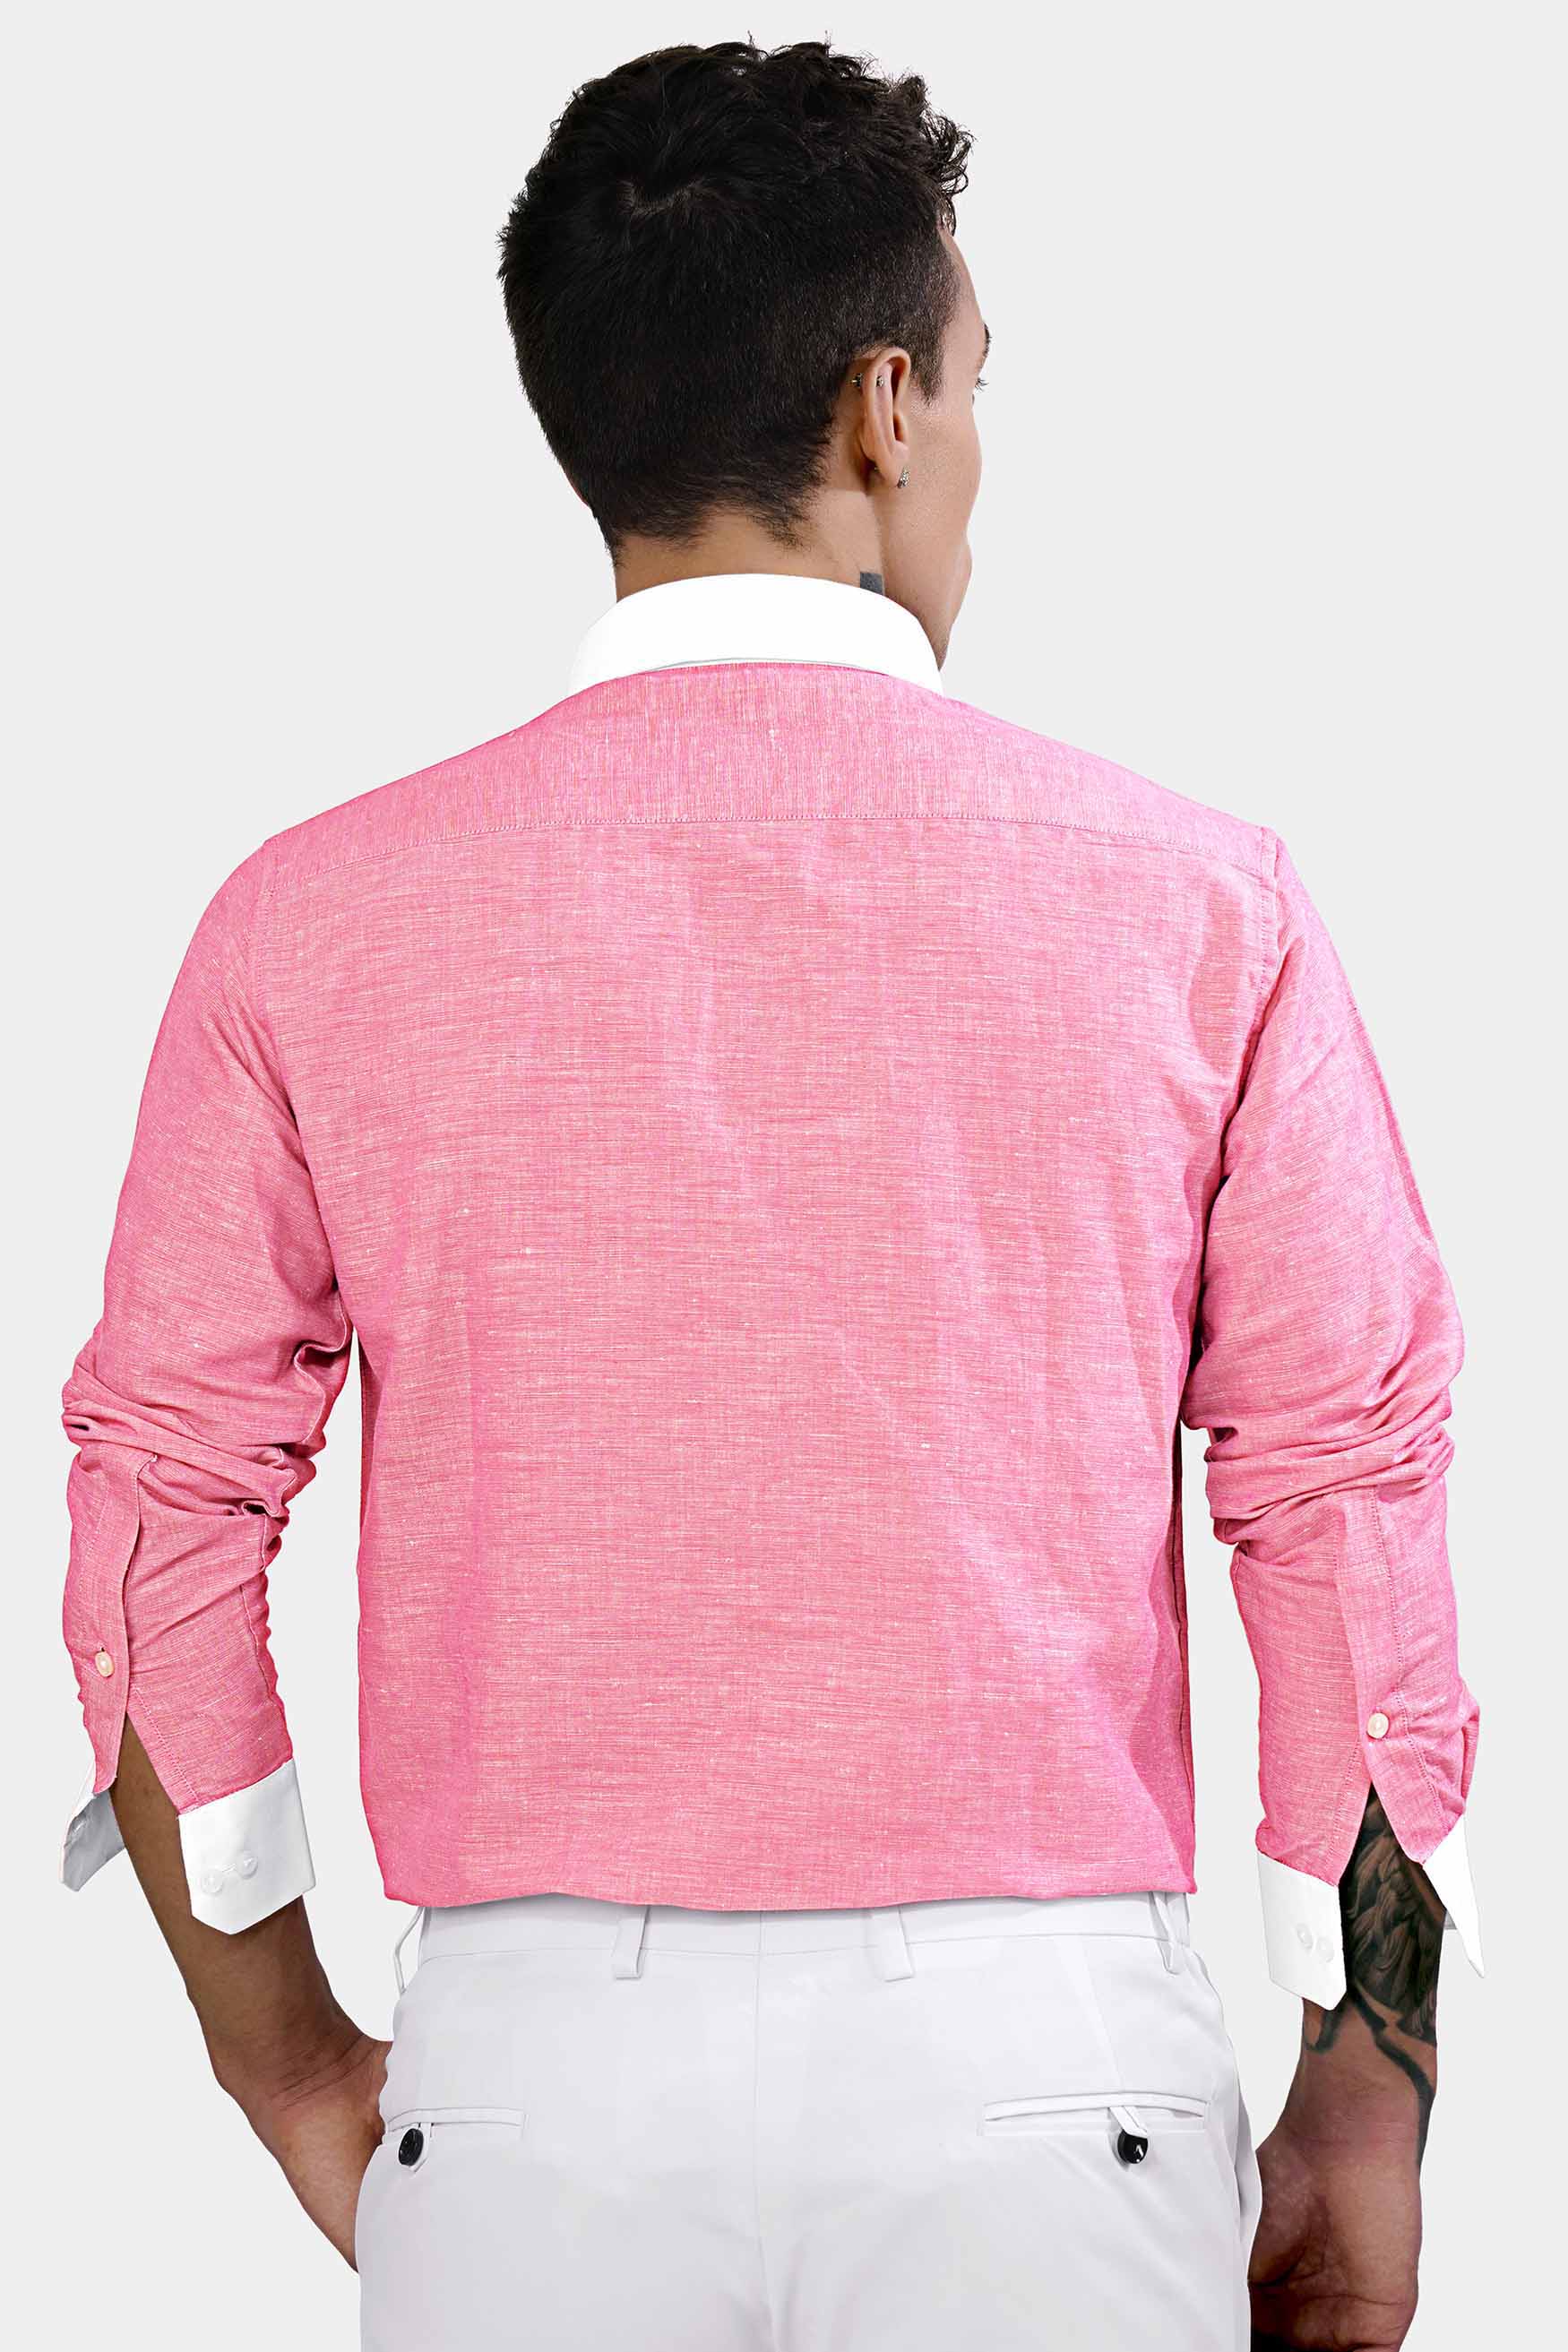 Flamingo Pink with White Cuffs and Collar Luxurious Linen Shirt 11462-WCC-38, 11462-WCC-H-38, 11462-WCC-39, 11462-WCC-H-39, 11462-WCC-40, 11462-WCC-H-40, 11462-WCC-42, 11462-WCC-H-42, 11462-WCC-44, 11462-WCC-H-44, 11462-WCC-46, 11462-WCC-H-46, 11462-WCC-48, 11462-WCC-H-48, 11462-WCC-50, 11462-WCC-H-50, 11462-WCC-52, 11462-WCC-H-52